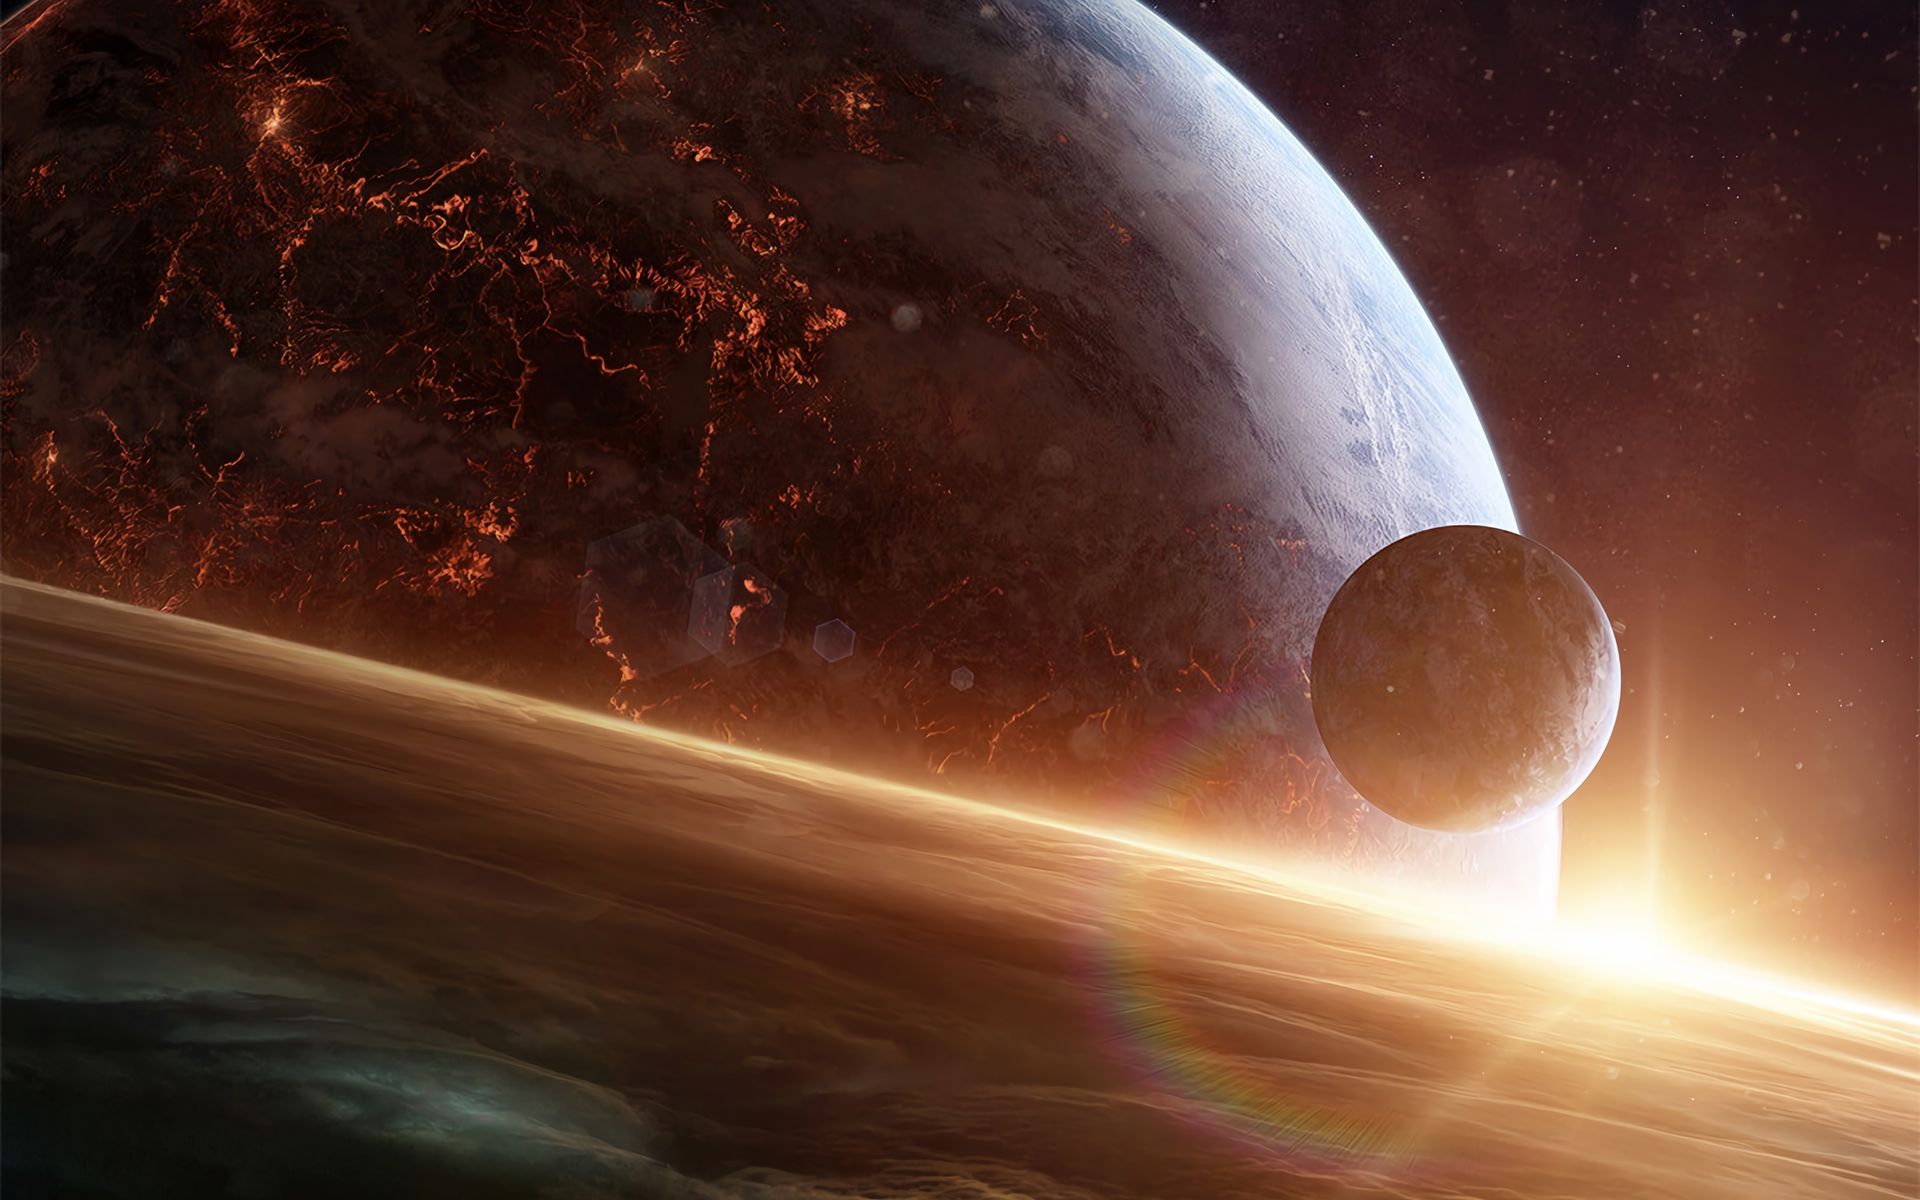 Download wallpaper 1920x1200 planets, space, outer space, universe ...